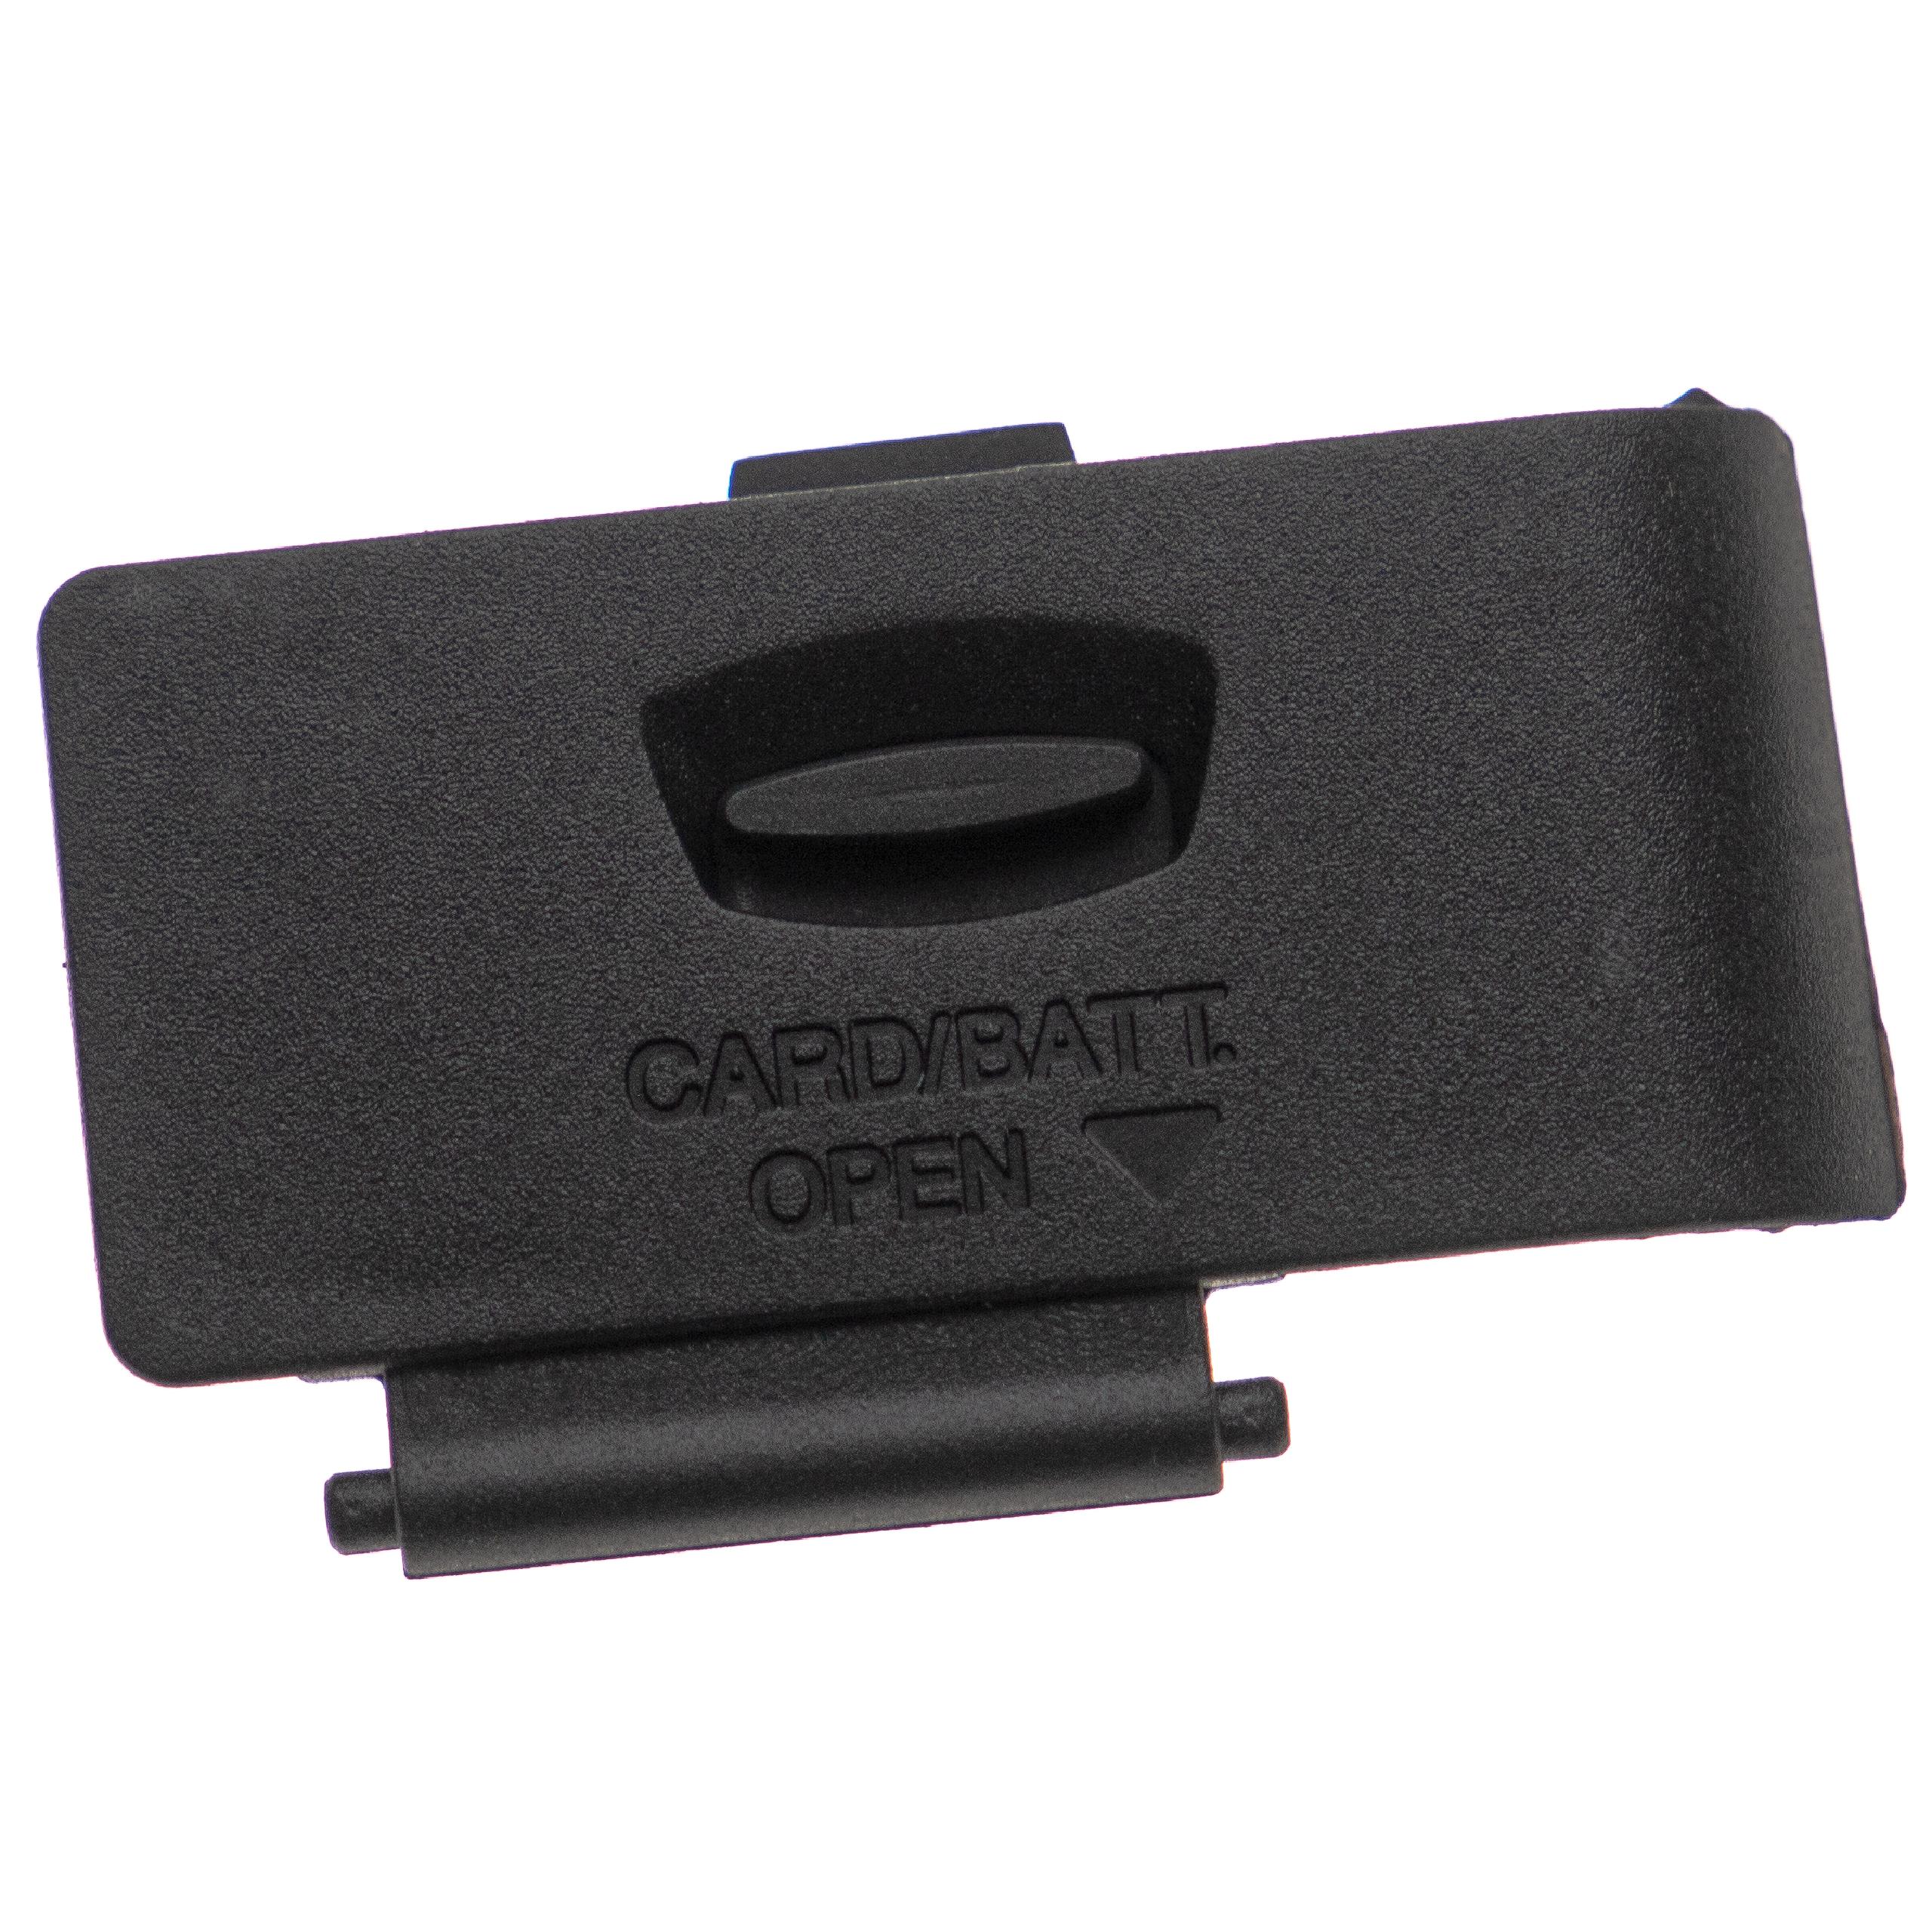 Battery Door Cover suitable for Canon EOS 1300D Camera, Battery Grip